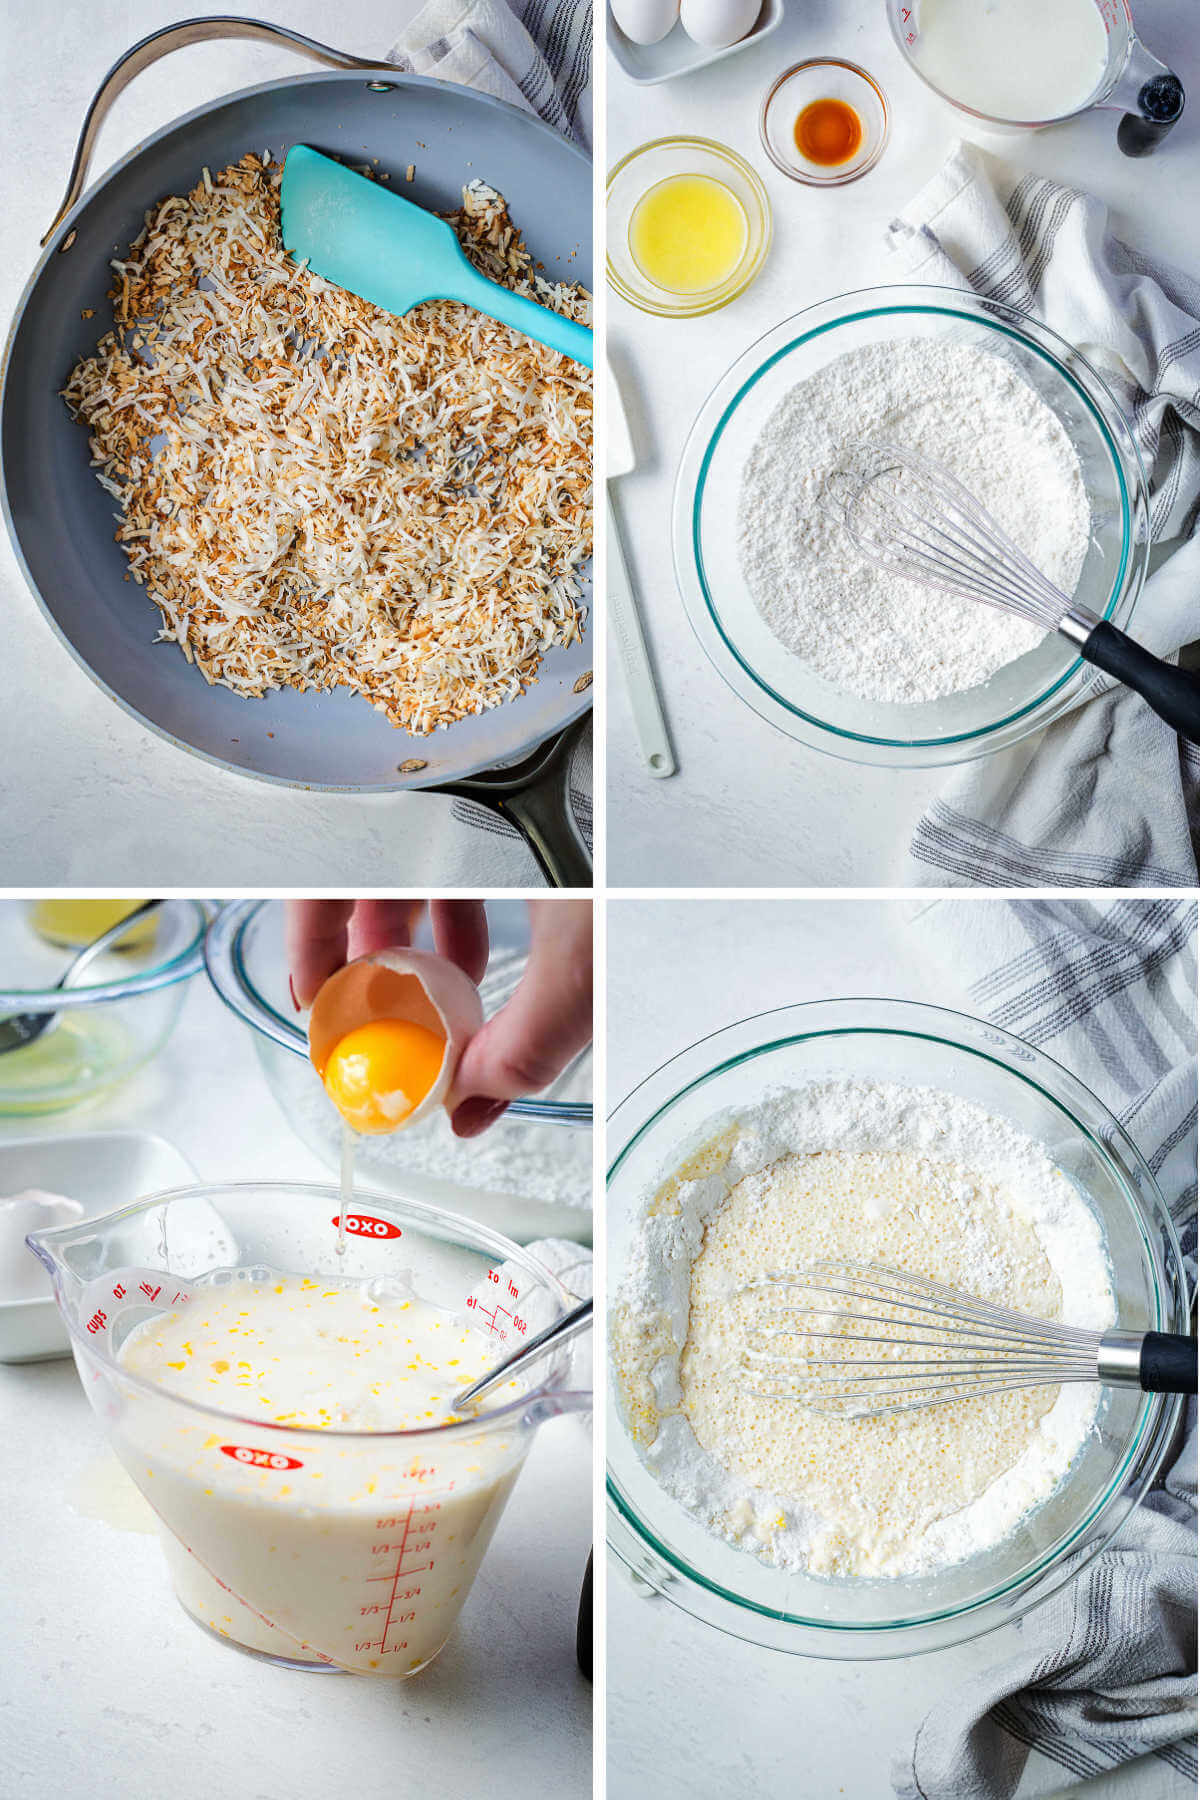 Process steps for making pancake batter: toasted coconut in a pan; whisking dry ingredients; combining wet ingredients.